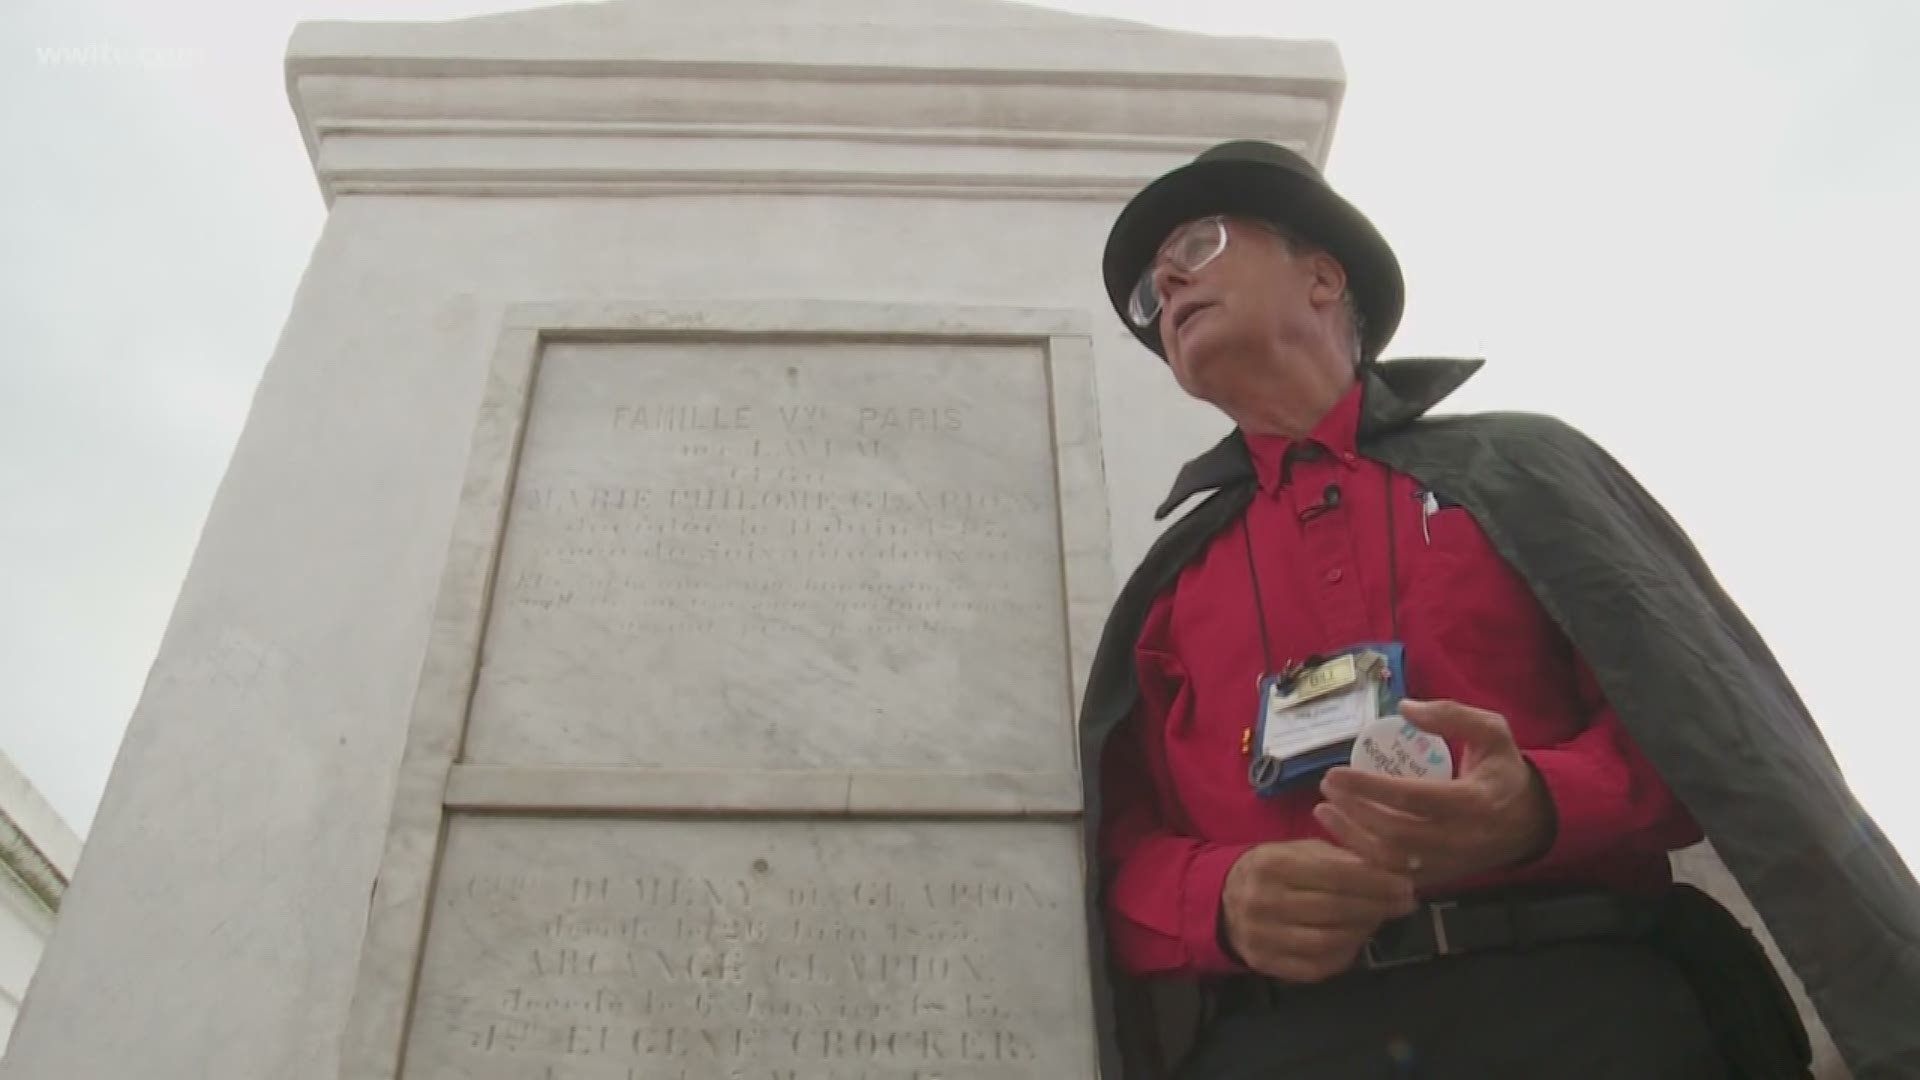 Capo's reporting helped raise the $10,000 to restore Laveau's tomb